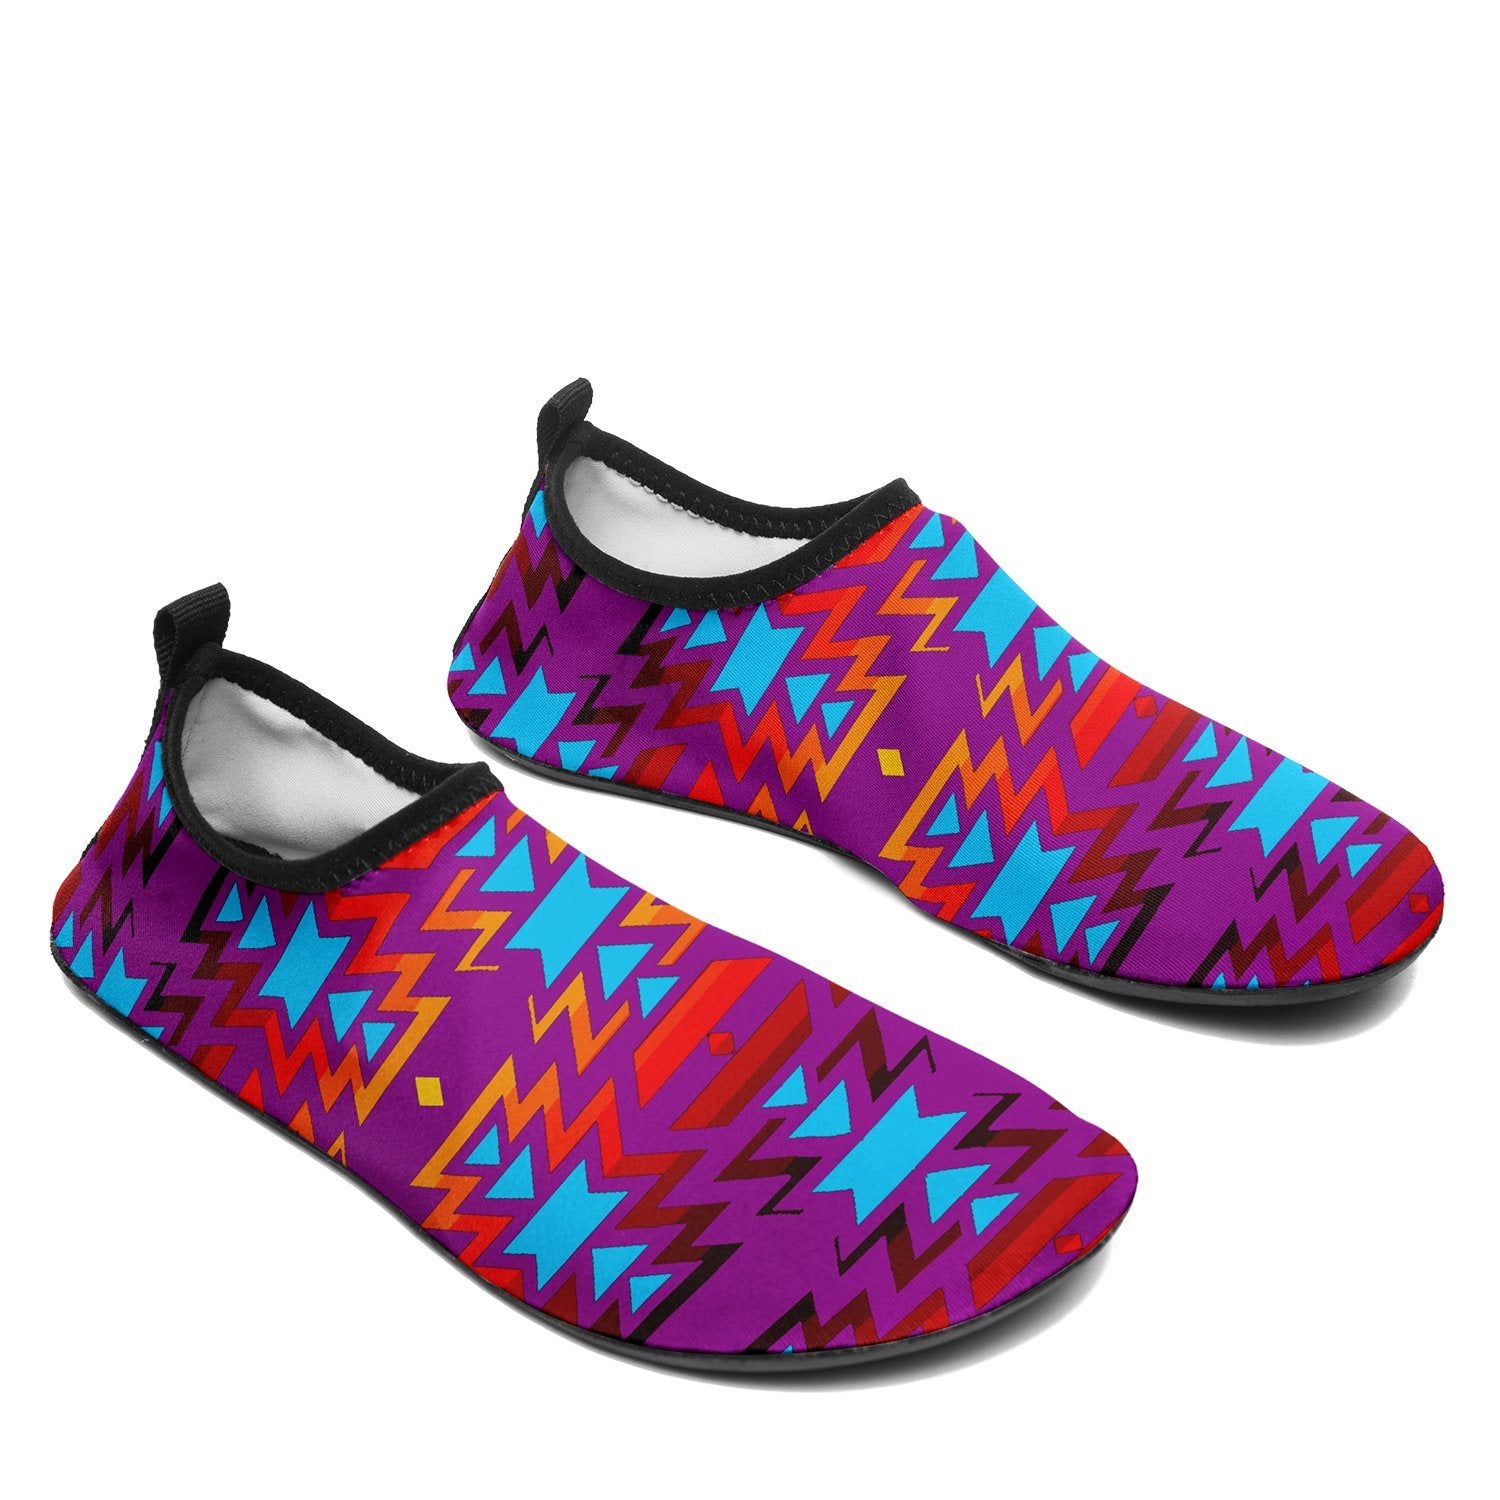 Fire Colors and Turquoise Purple Sockamoccs Slip On Shoes 49 Dzine 